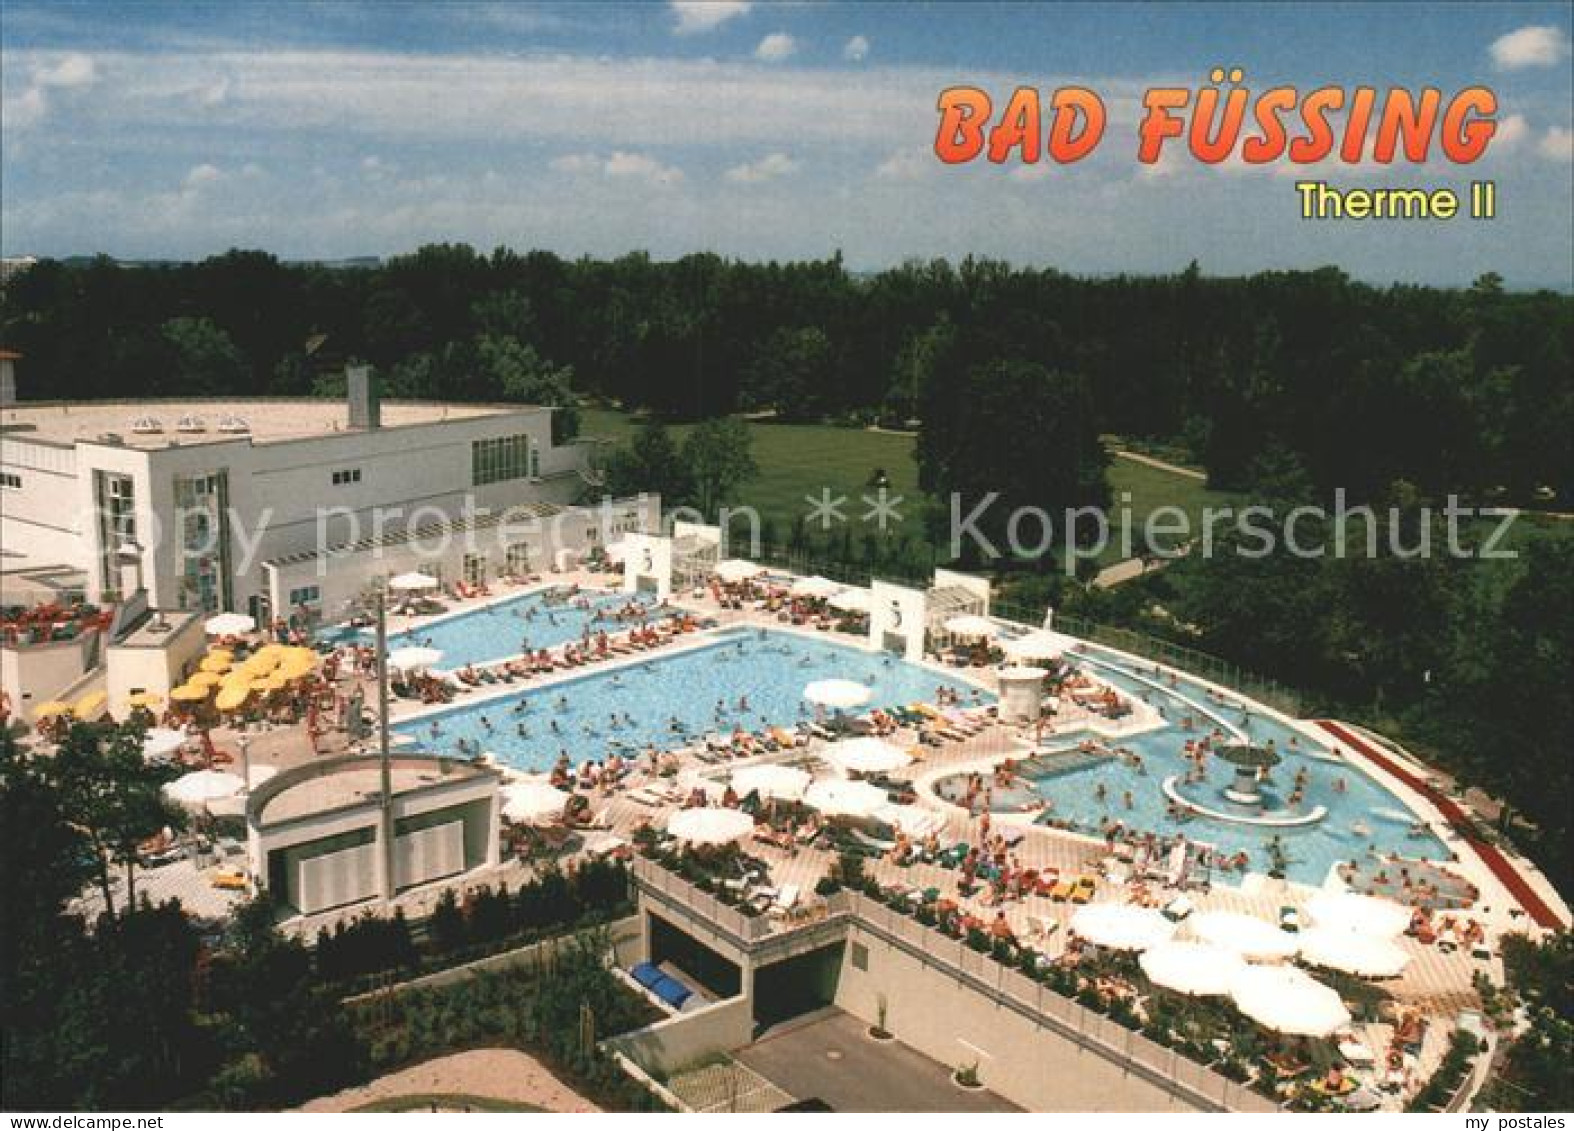 72369490 Fuessing Bad Therme II Top Thermalbad Bad Fuessing - Bad Fuessing